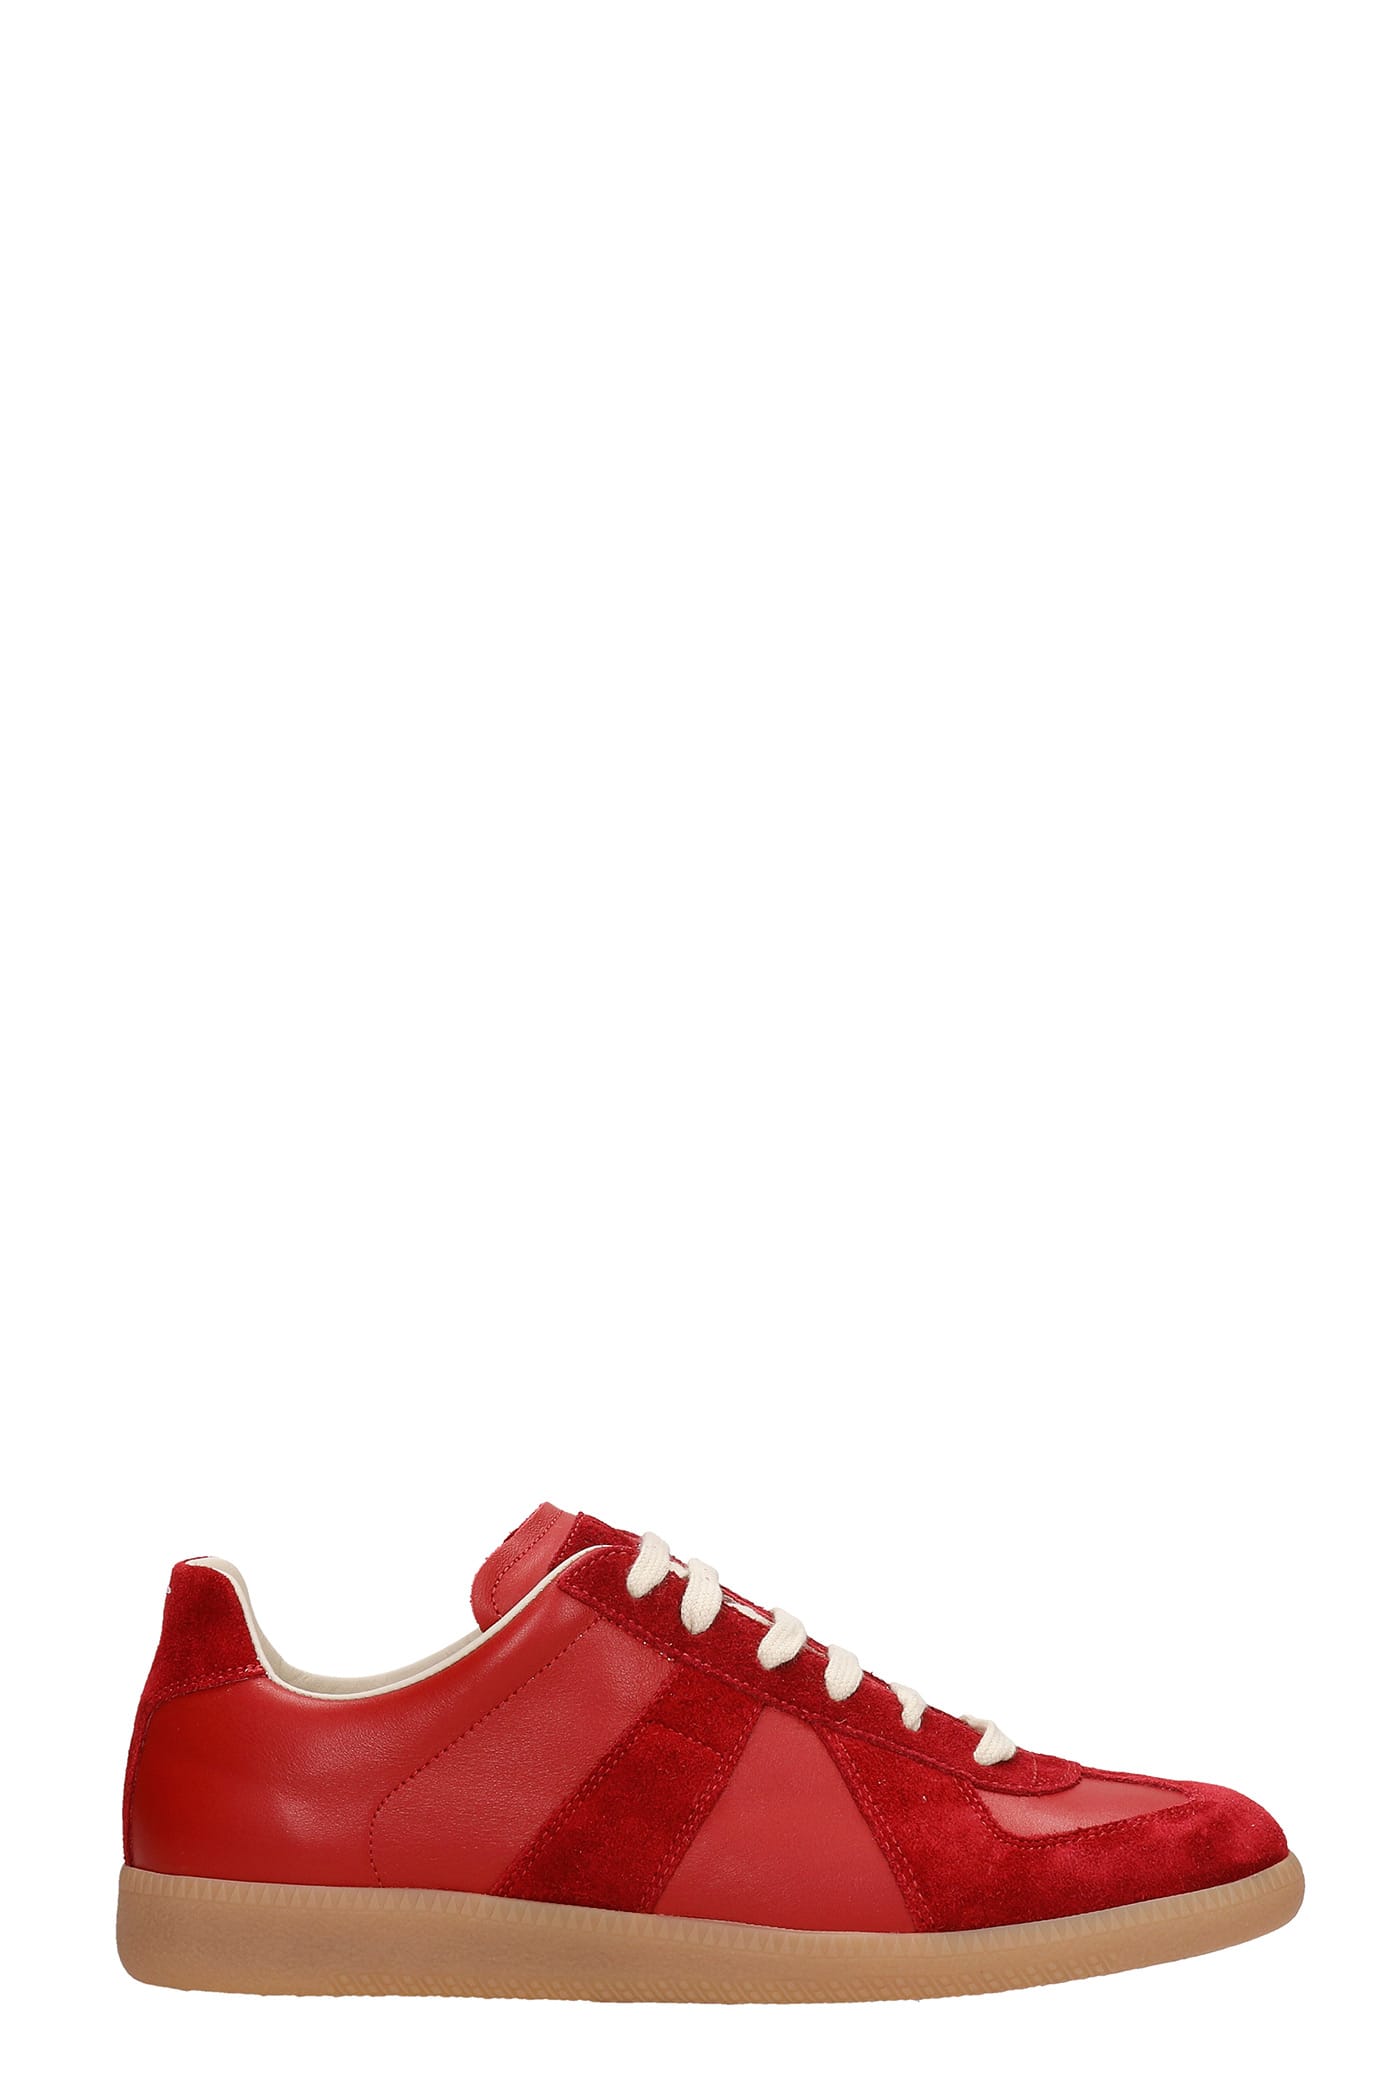 Maison Margiela Replica Sneakers In Red Suede And Leather